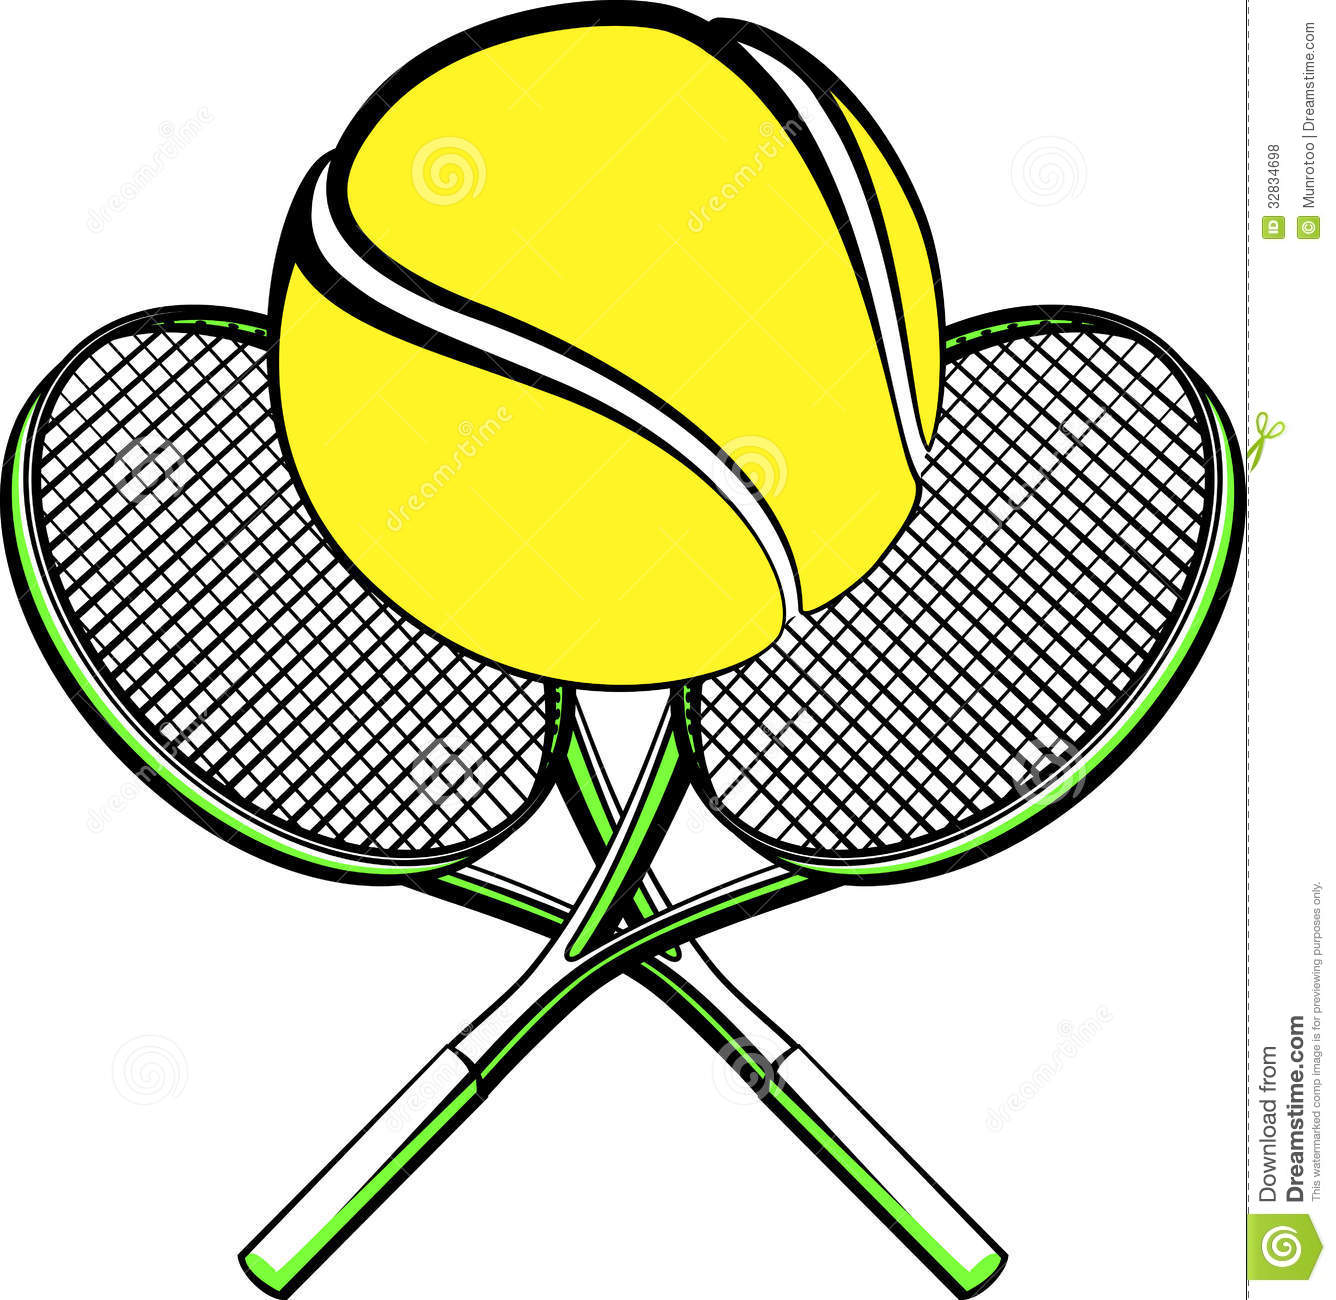 Tennis Ball And Racket Clip Art   Clipart Panda   Free Clipart Images